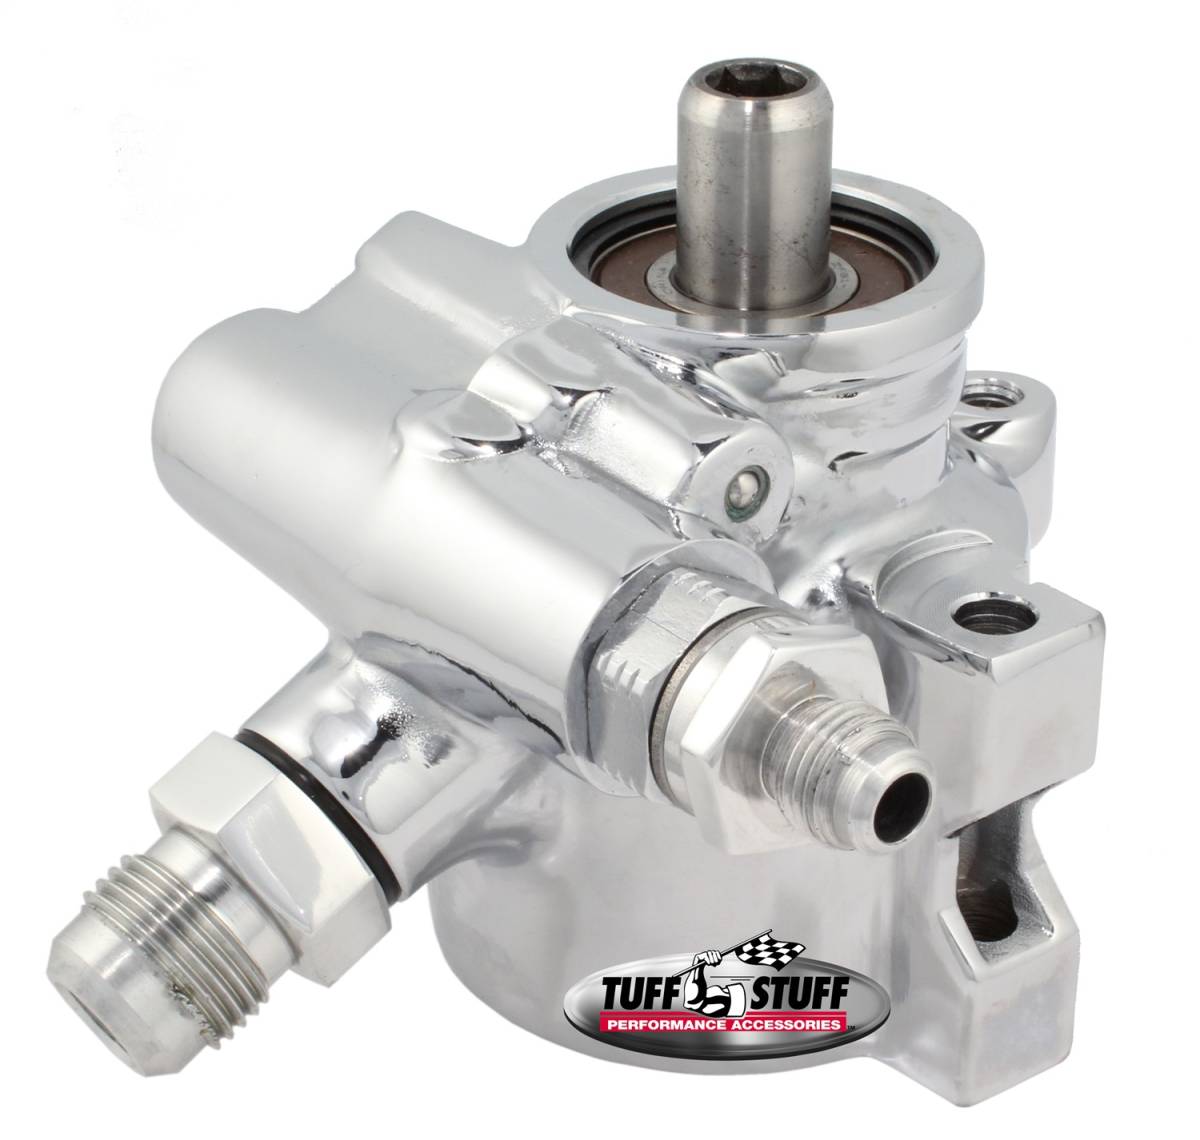 Tuff Stuff Performance - Type II Alum. Power Steering Pump AN-6 And AN-10 Fitting 8mm Through Hole Mounting Aluminum For Street Rods/Custom Vehicles w/Limited Engine Space Polished 6175ALP